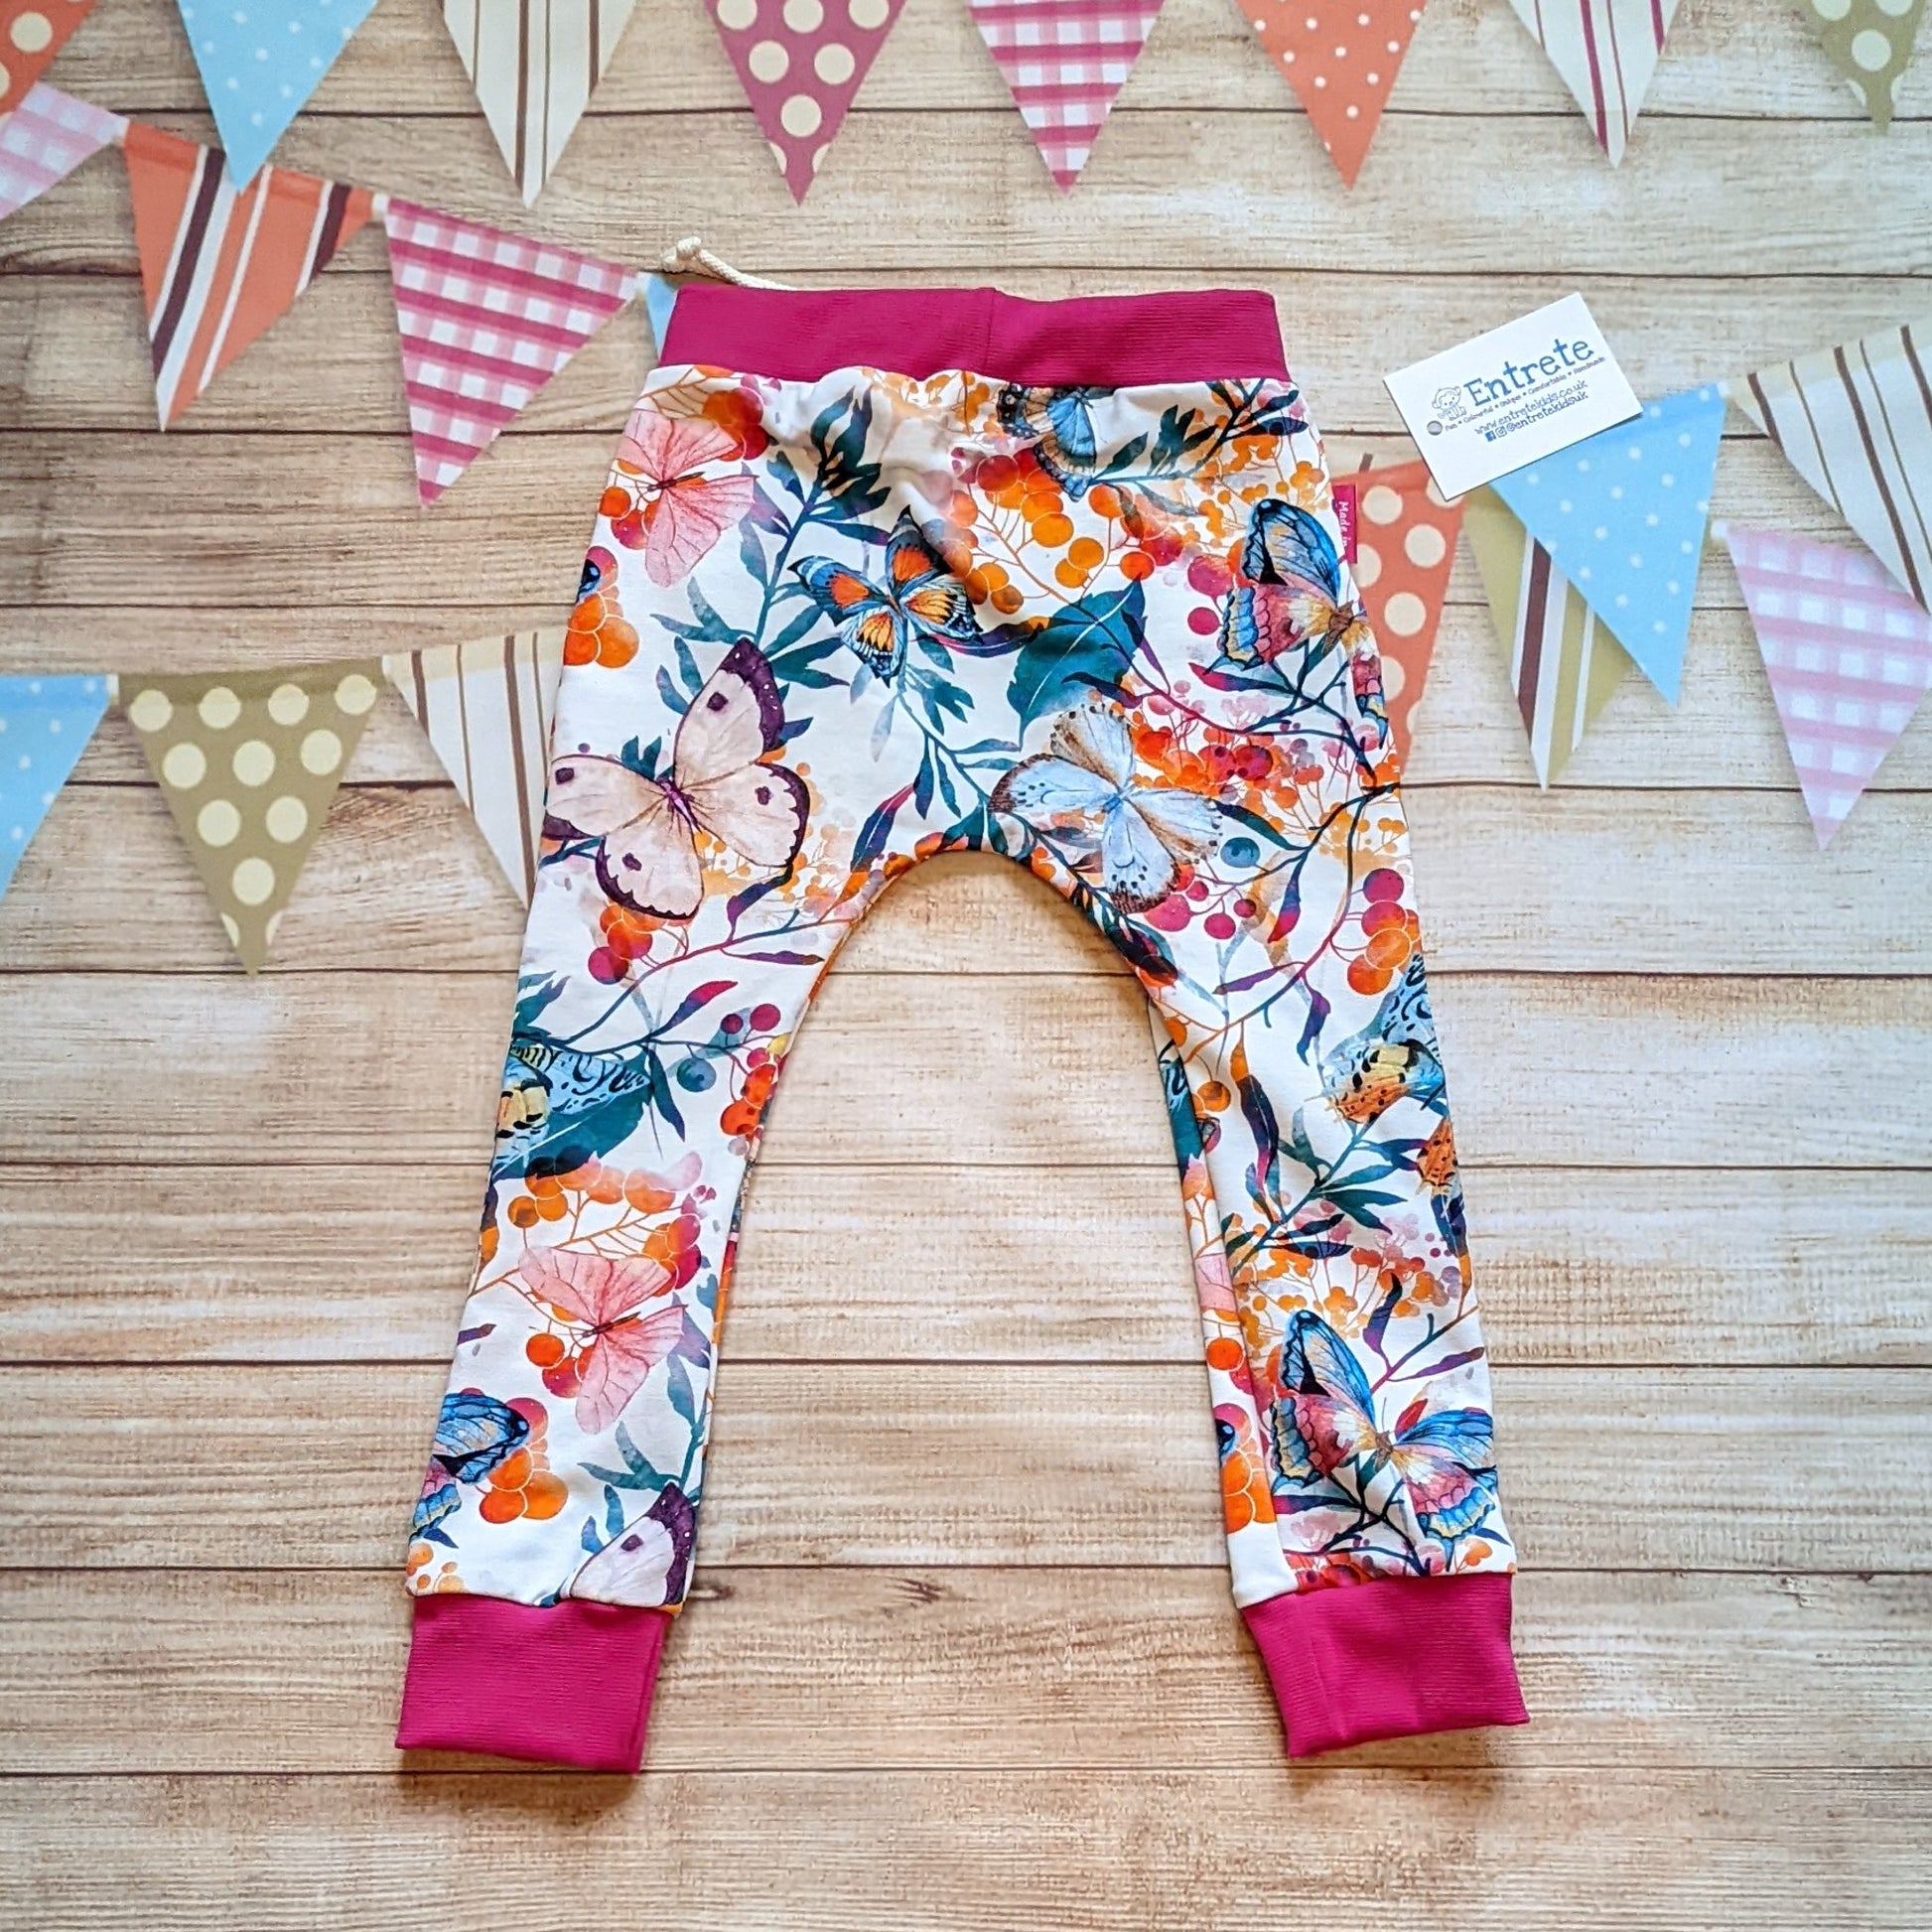 Vibrant butterflies harem joggers, handmade using vibrant butterflies cotton jersey and fuchsia cotton ribbing. Shown from the rear.